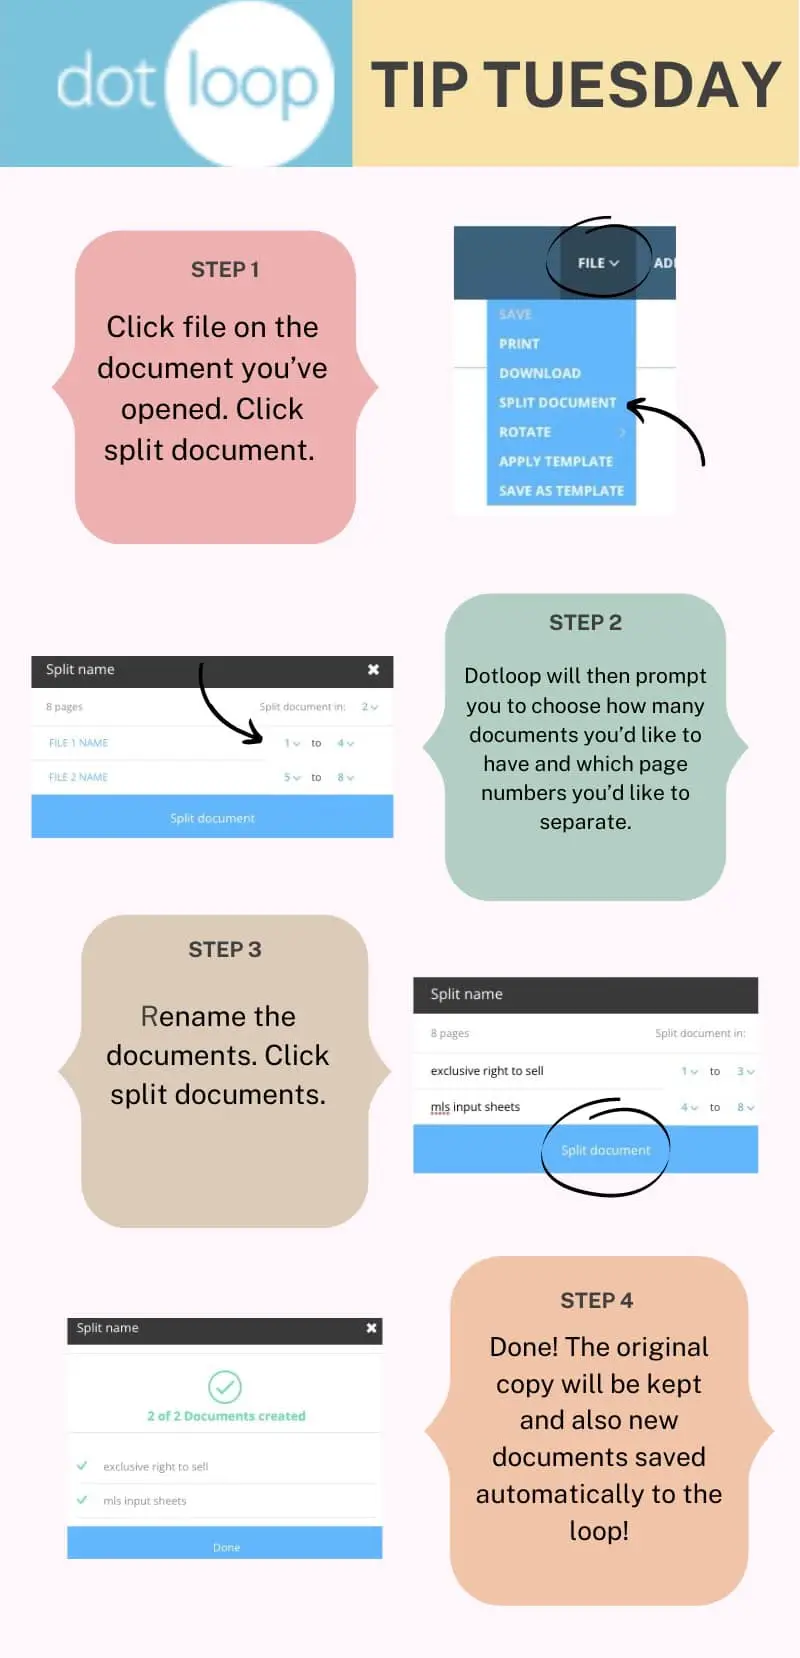 Did you add one large scan of seller signed documents into your dotloop and need to separate them to make your loop clean? This tip is for you! (And especially helpful to admins). See some easy steps below to split a large scan and save separate documents into your loop.